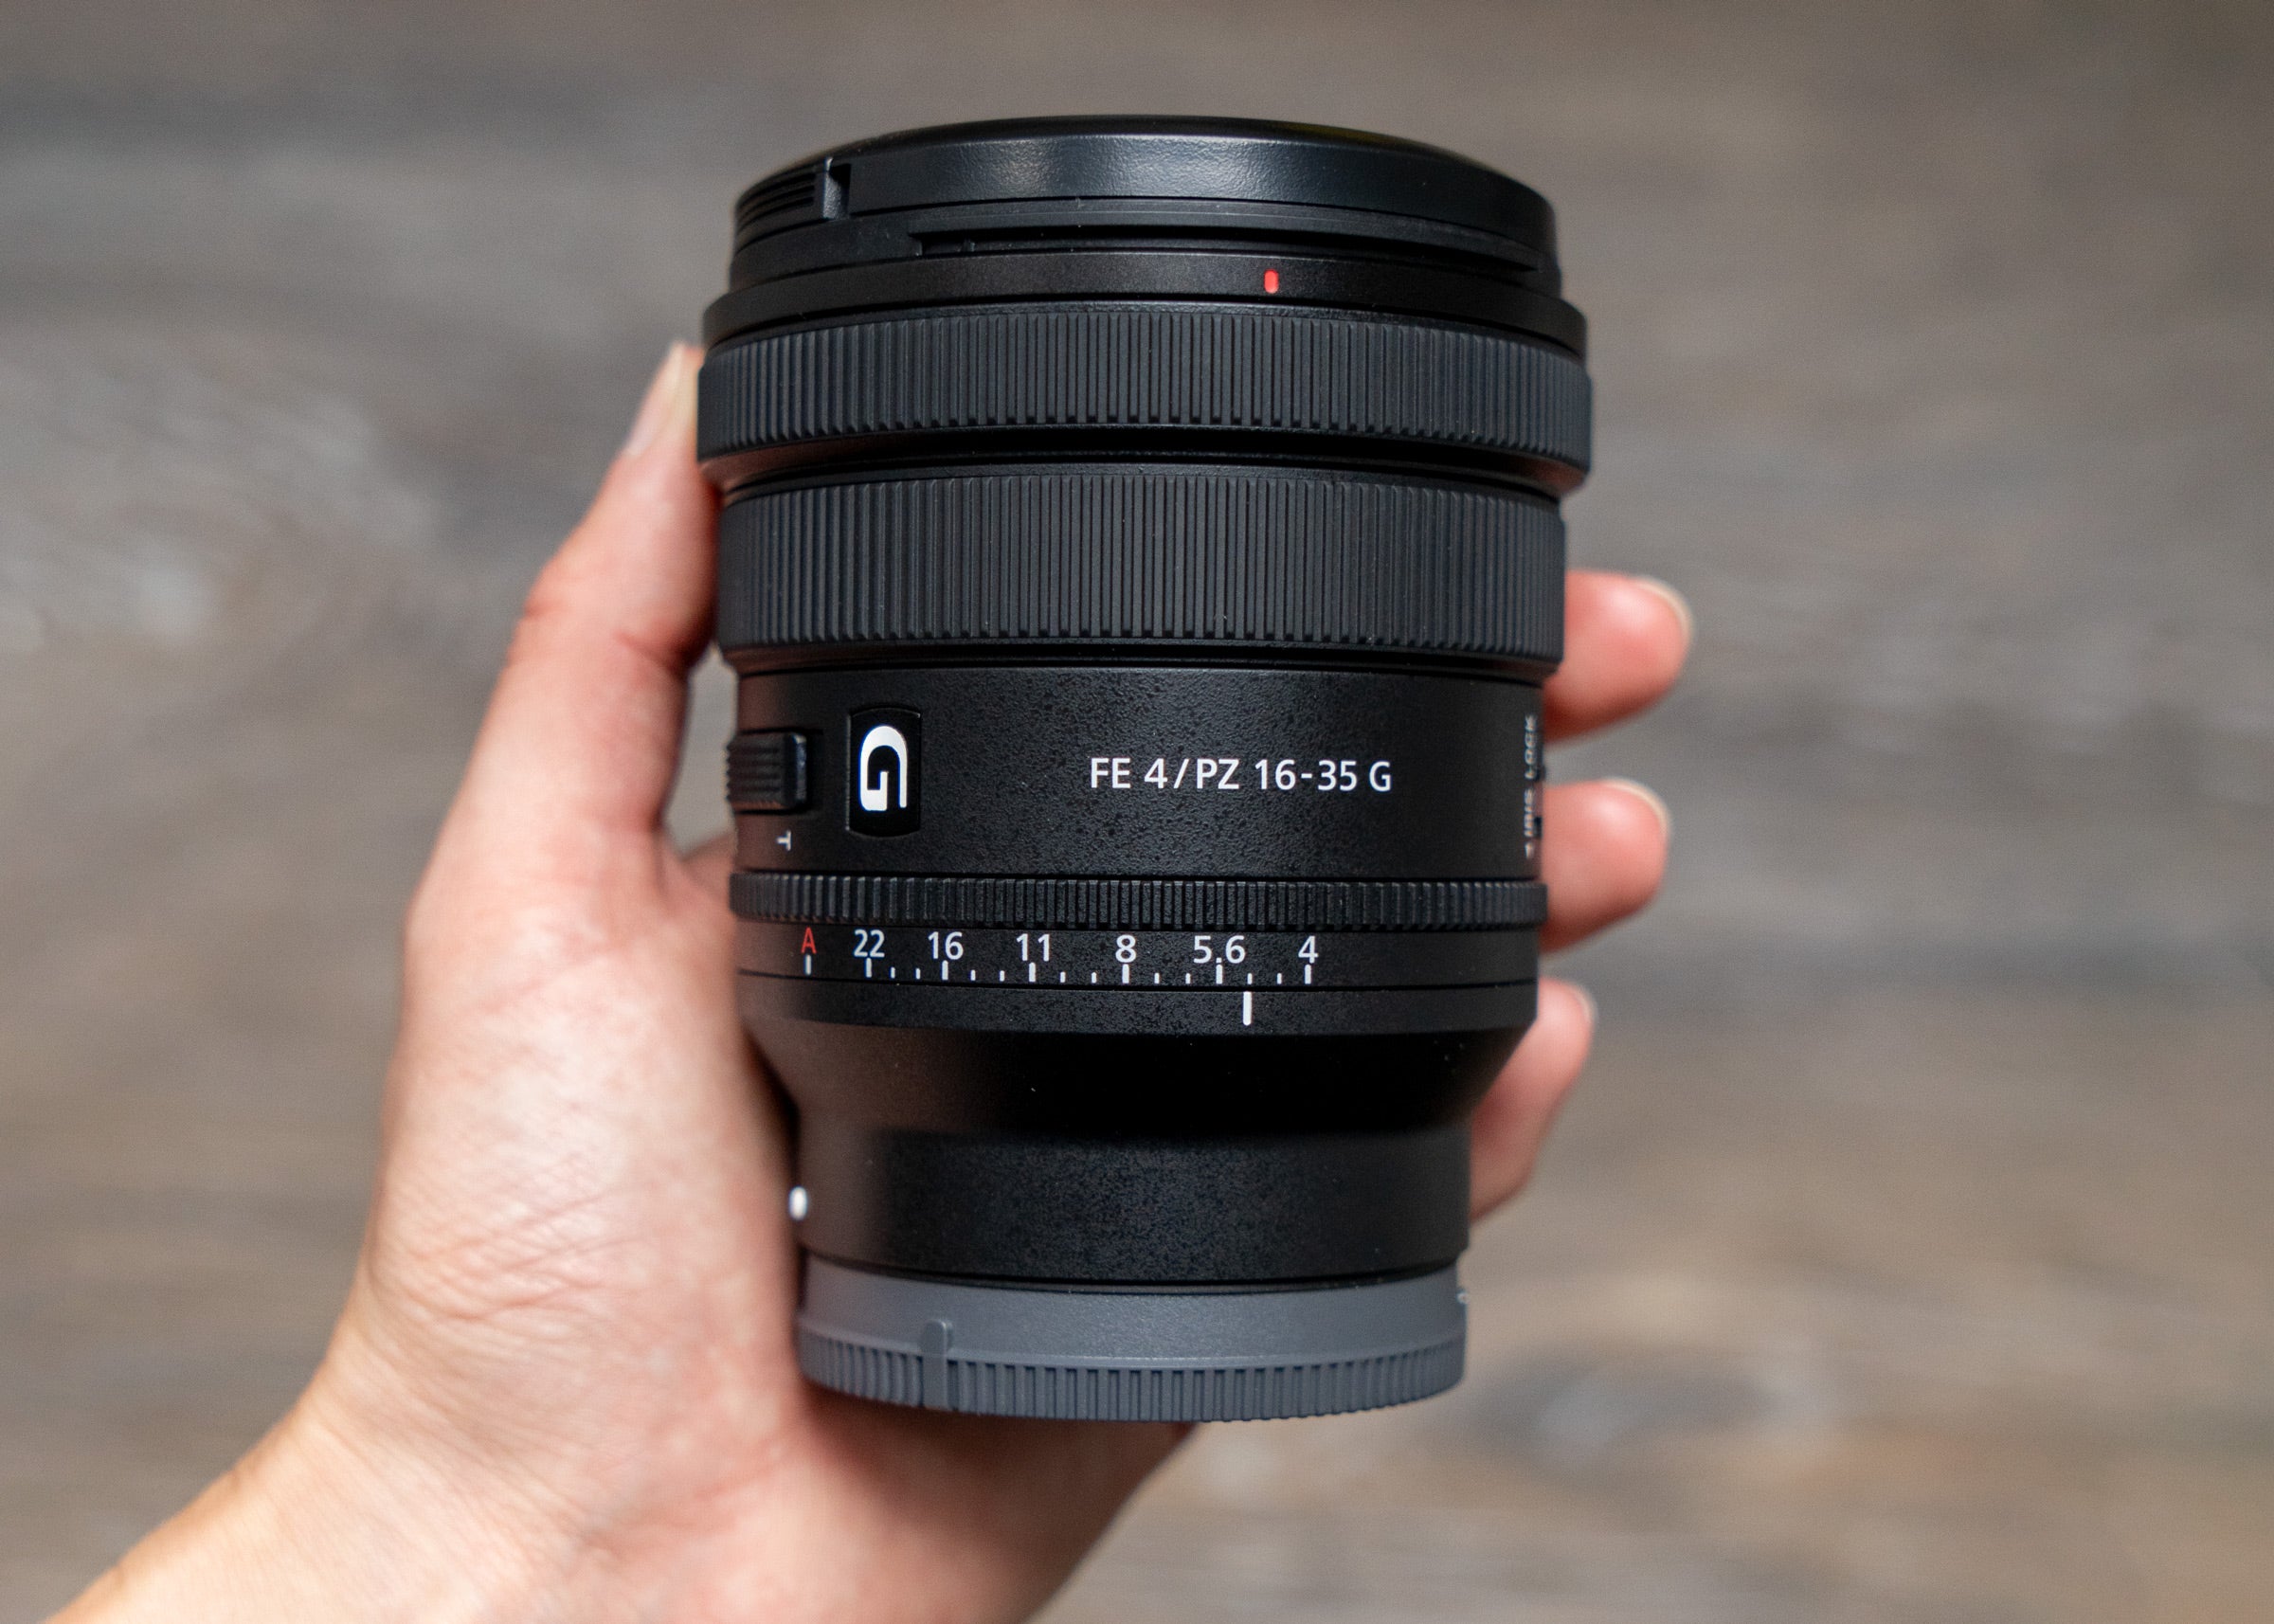 The Sony FE PZ 16-35mm f/4 G lens is seriously small and lightweight.